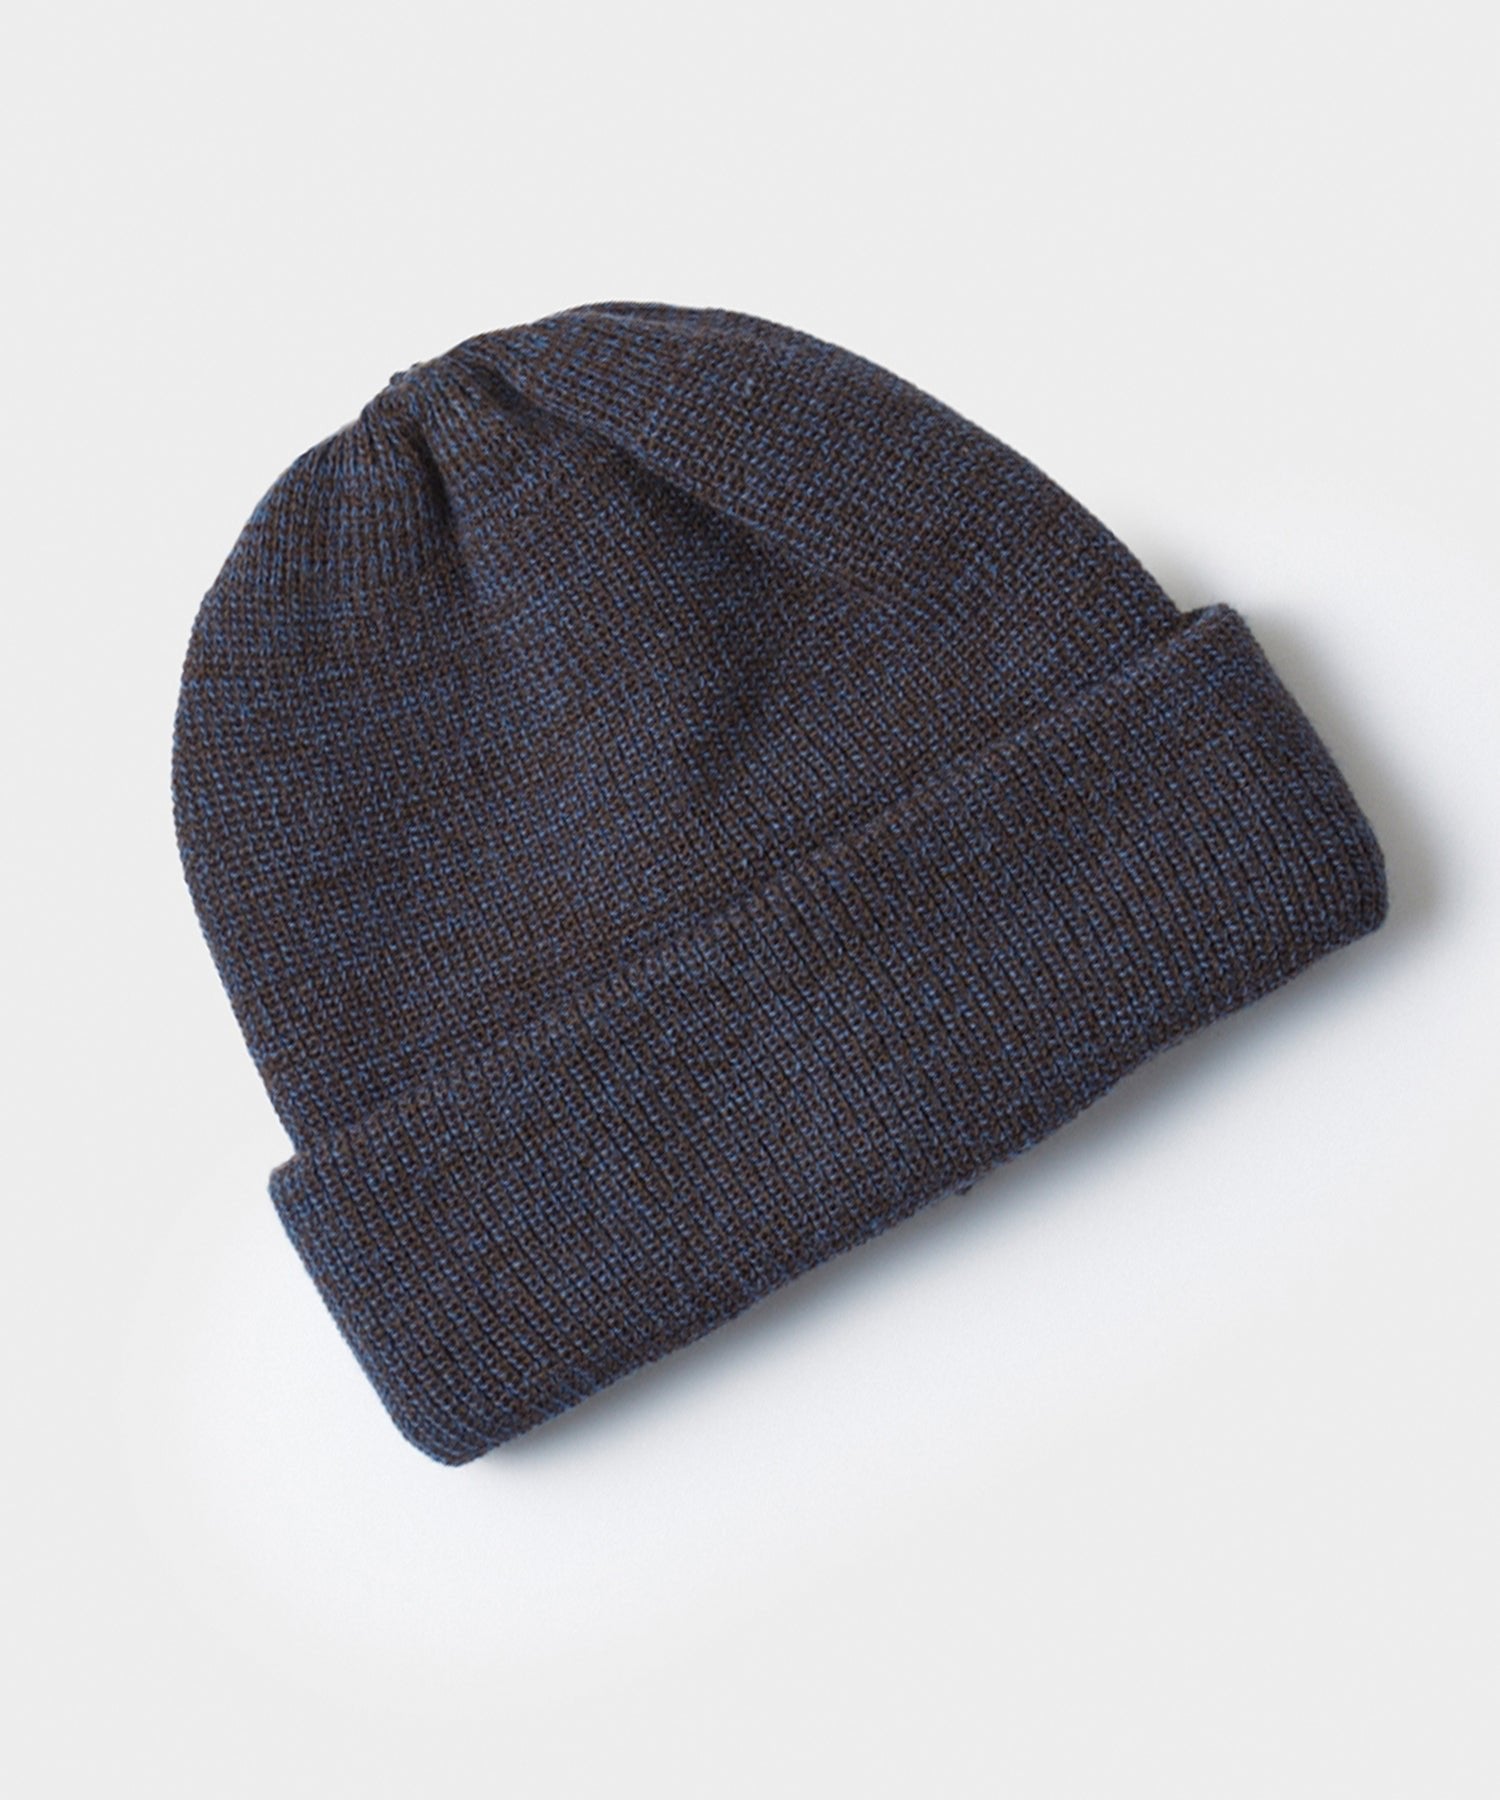 RoToTo Bulky Watch Cap in Charcoal/Blue